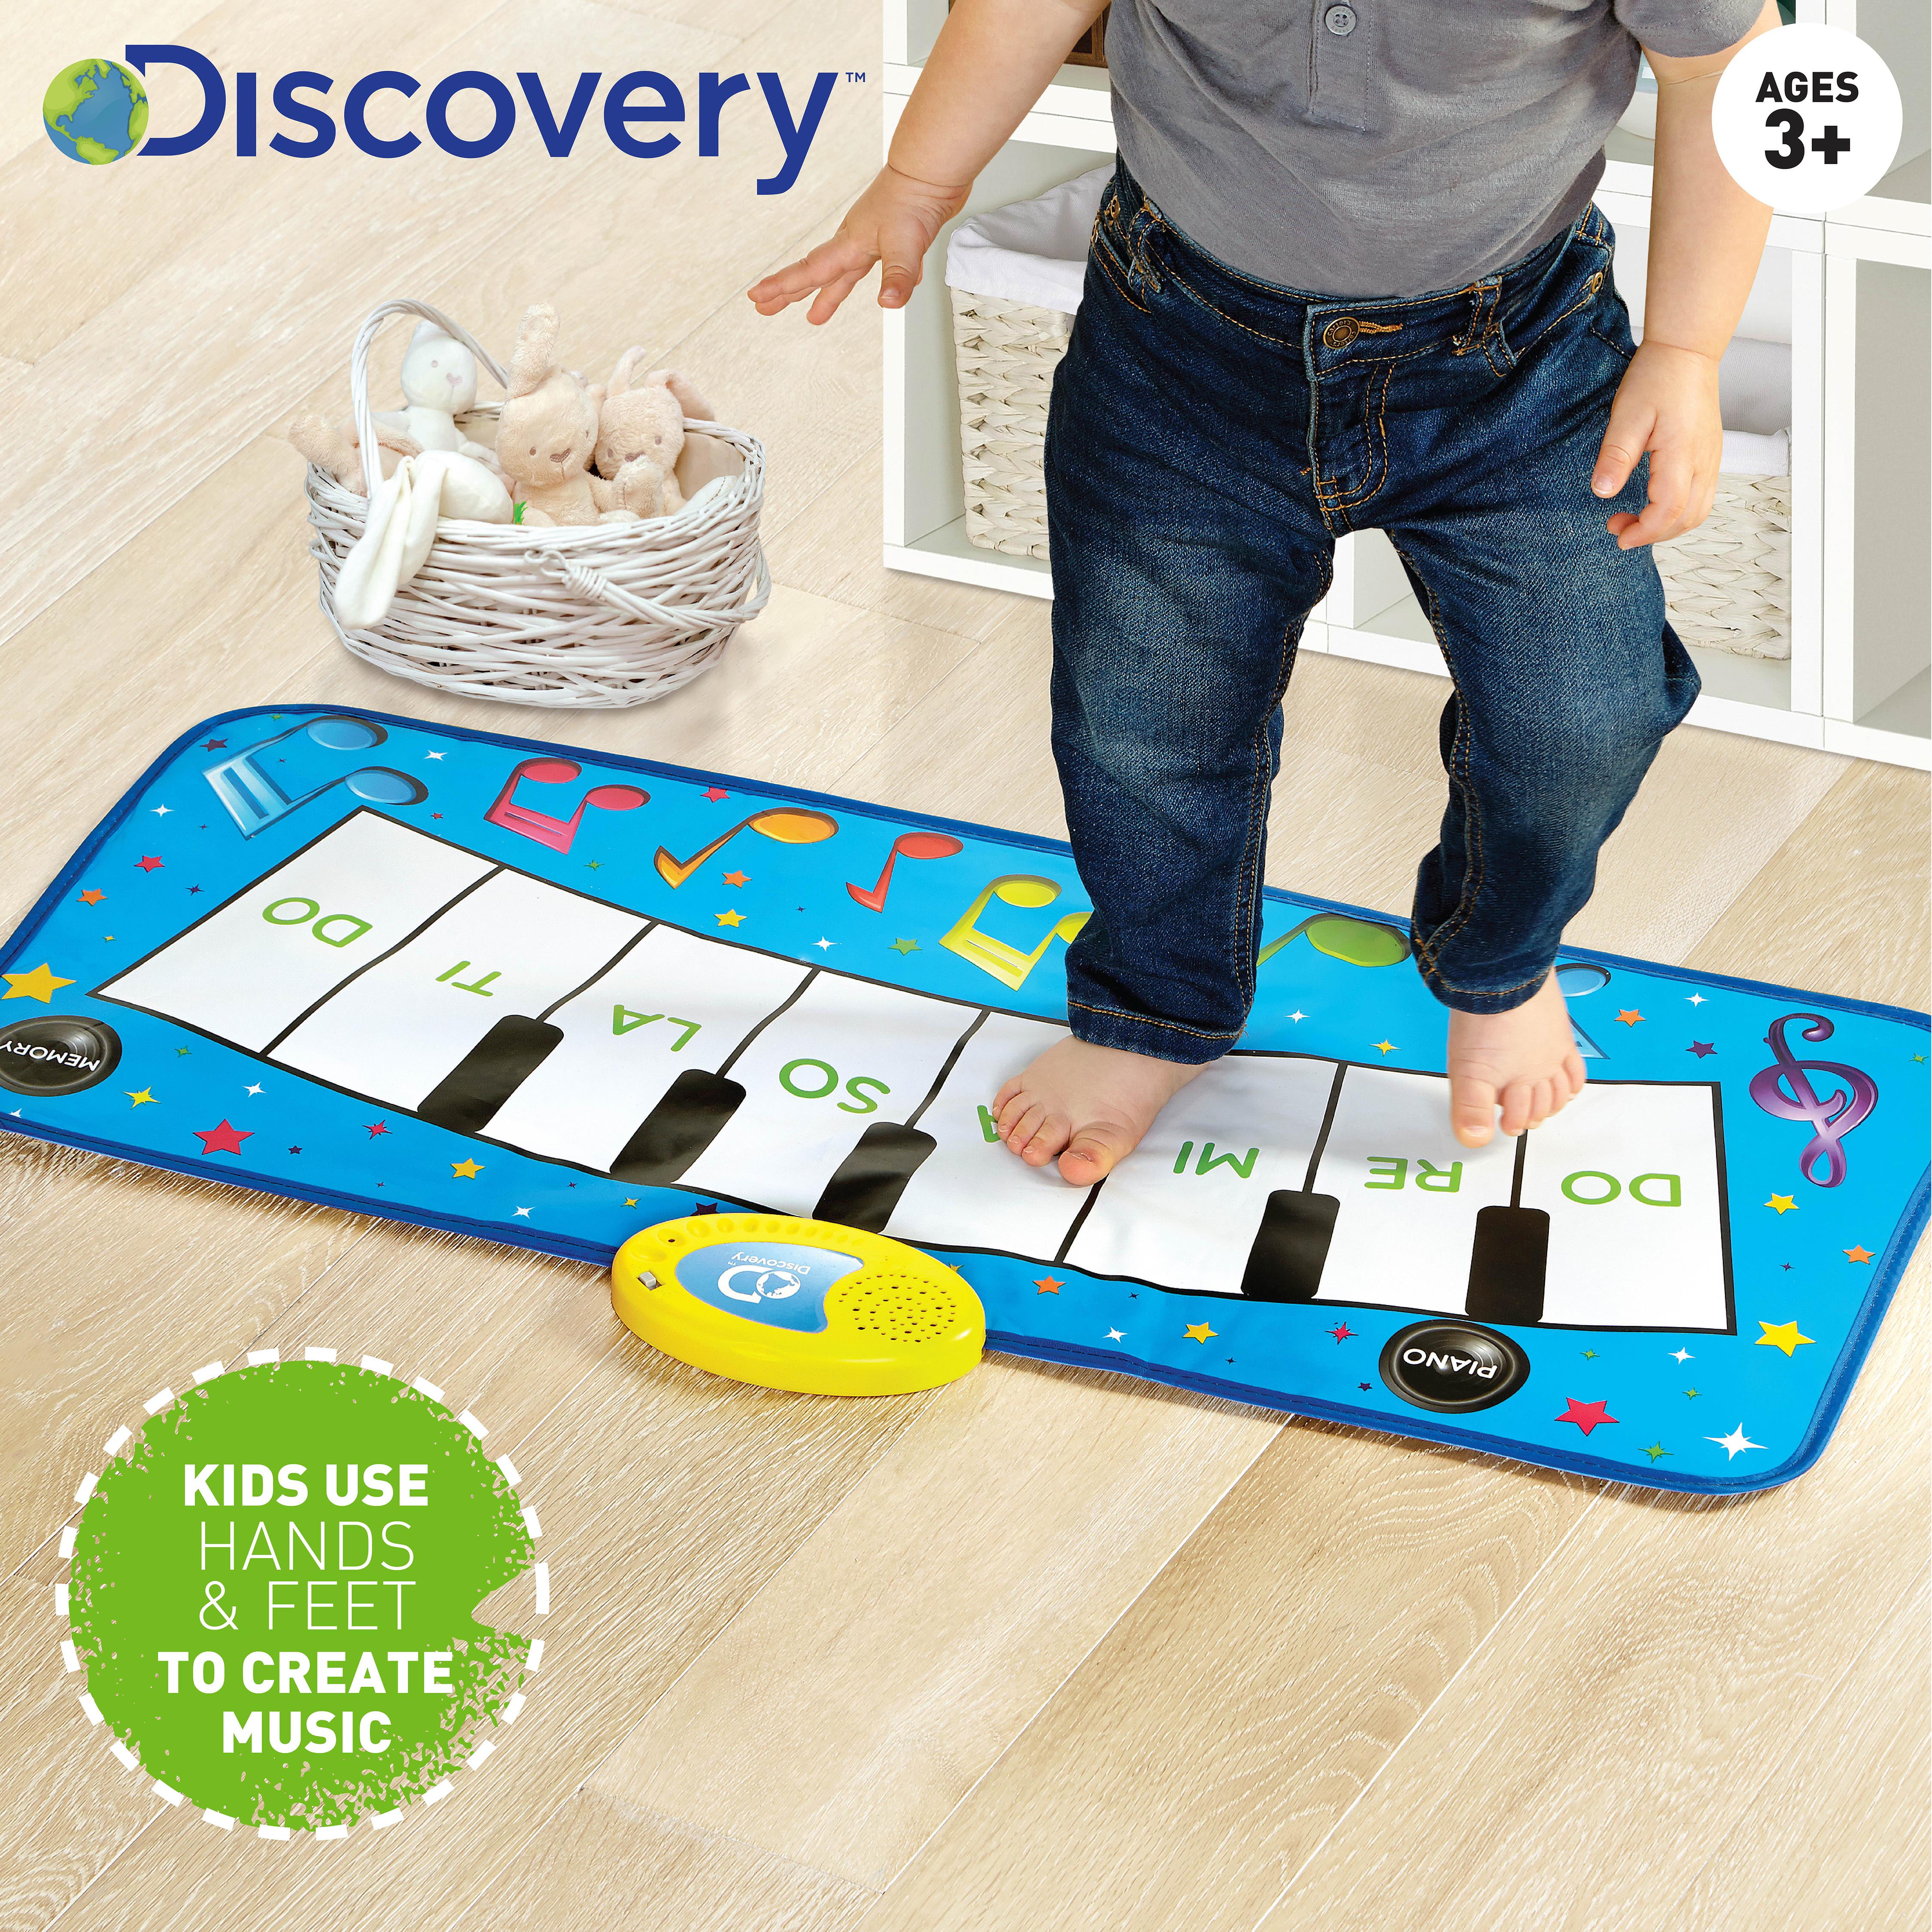 Discovery Kids Play Piano Build-in Song Dance Keyboard Mat Educational Toy Toddl 